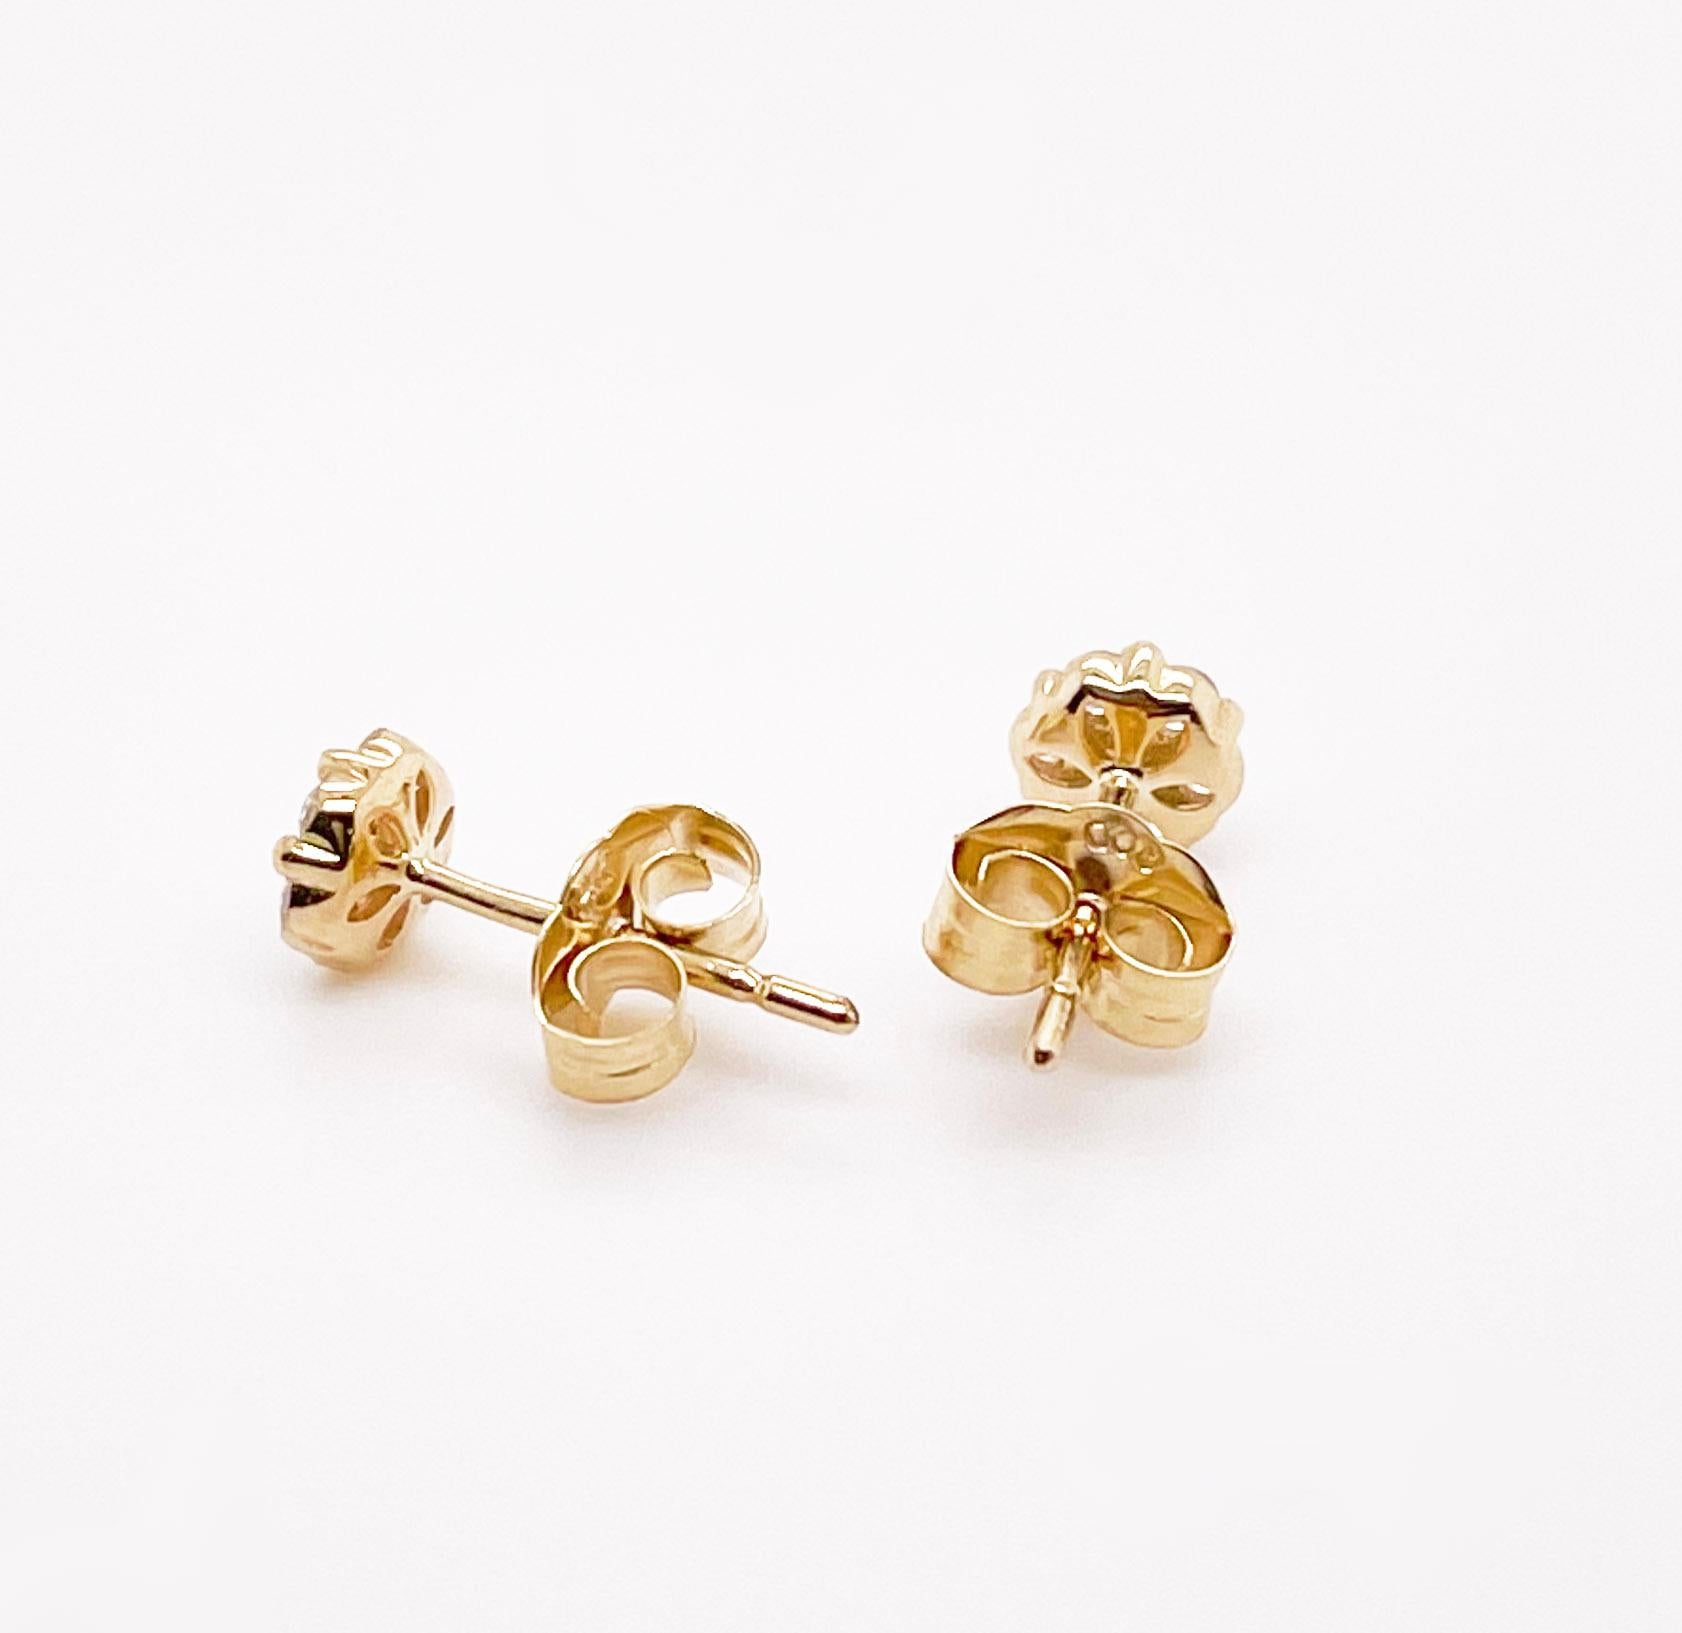 Round Cut Diamond Cluster Stud Earrings, Yellow Gold, Floral Design